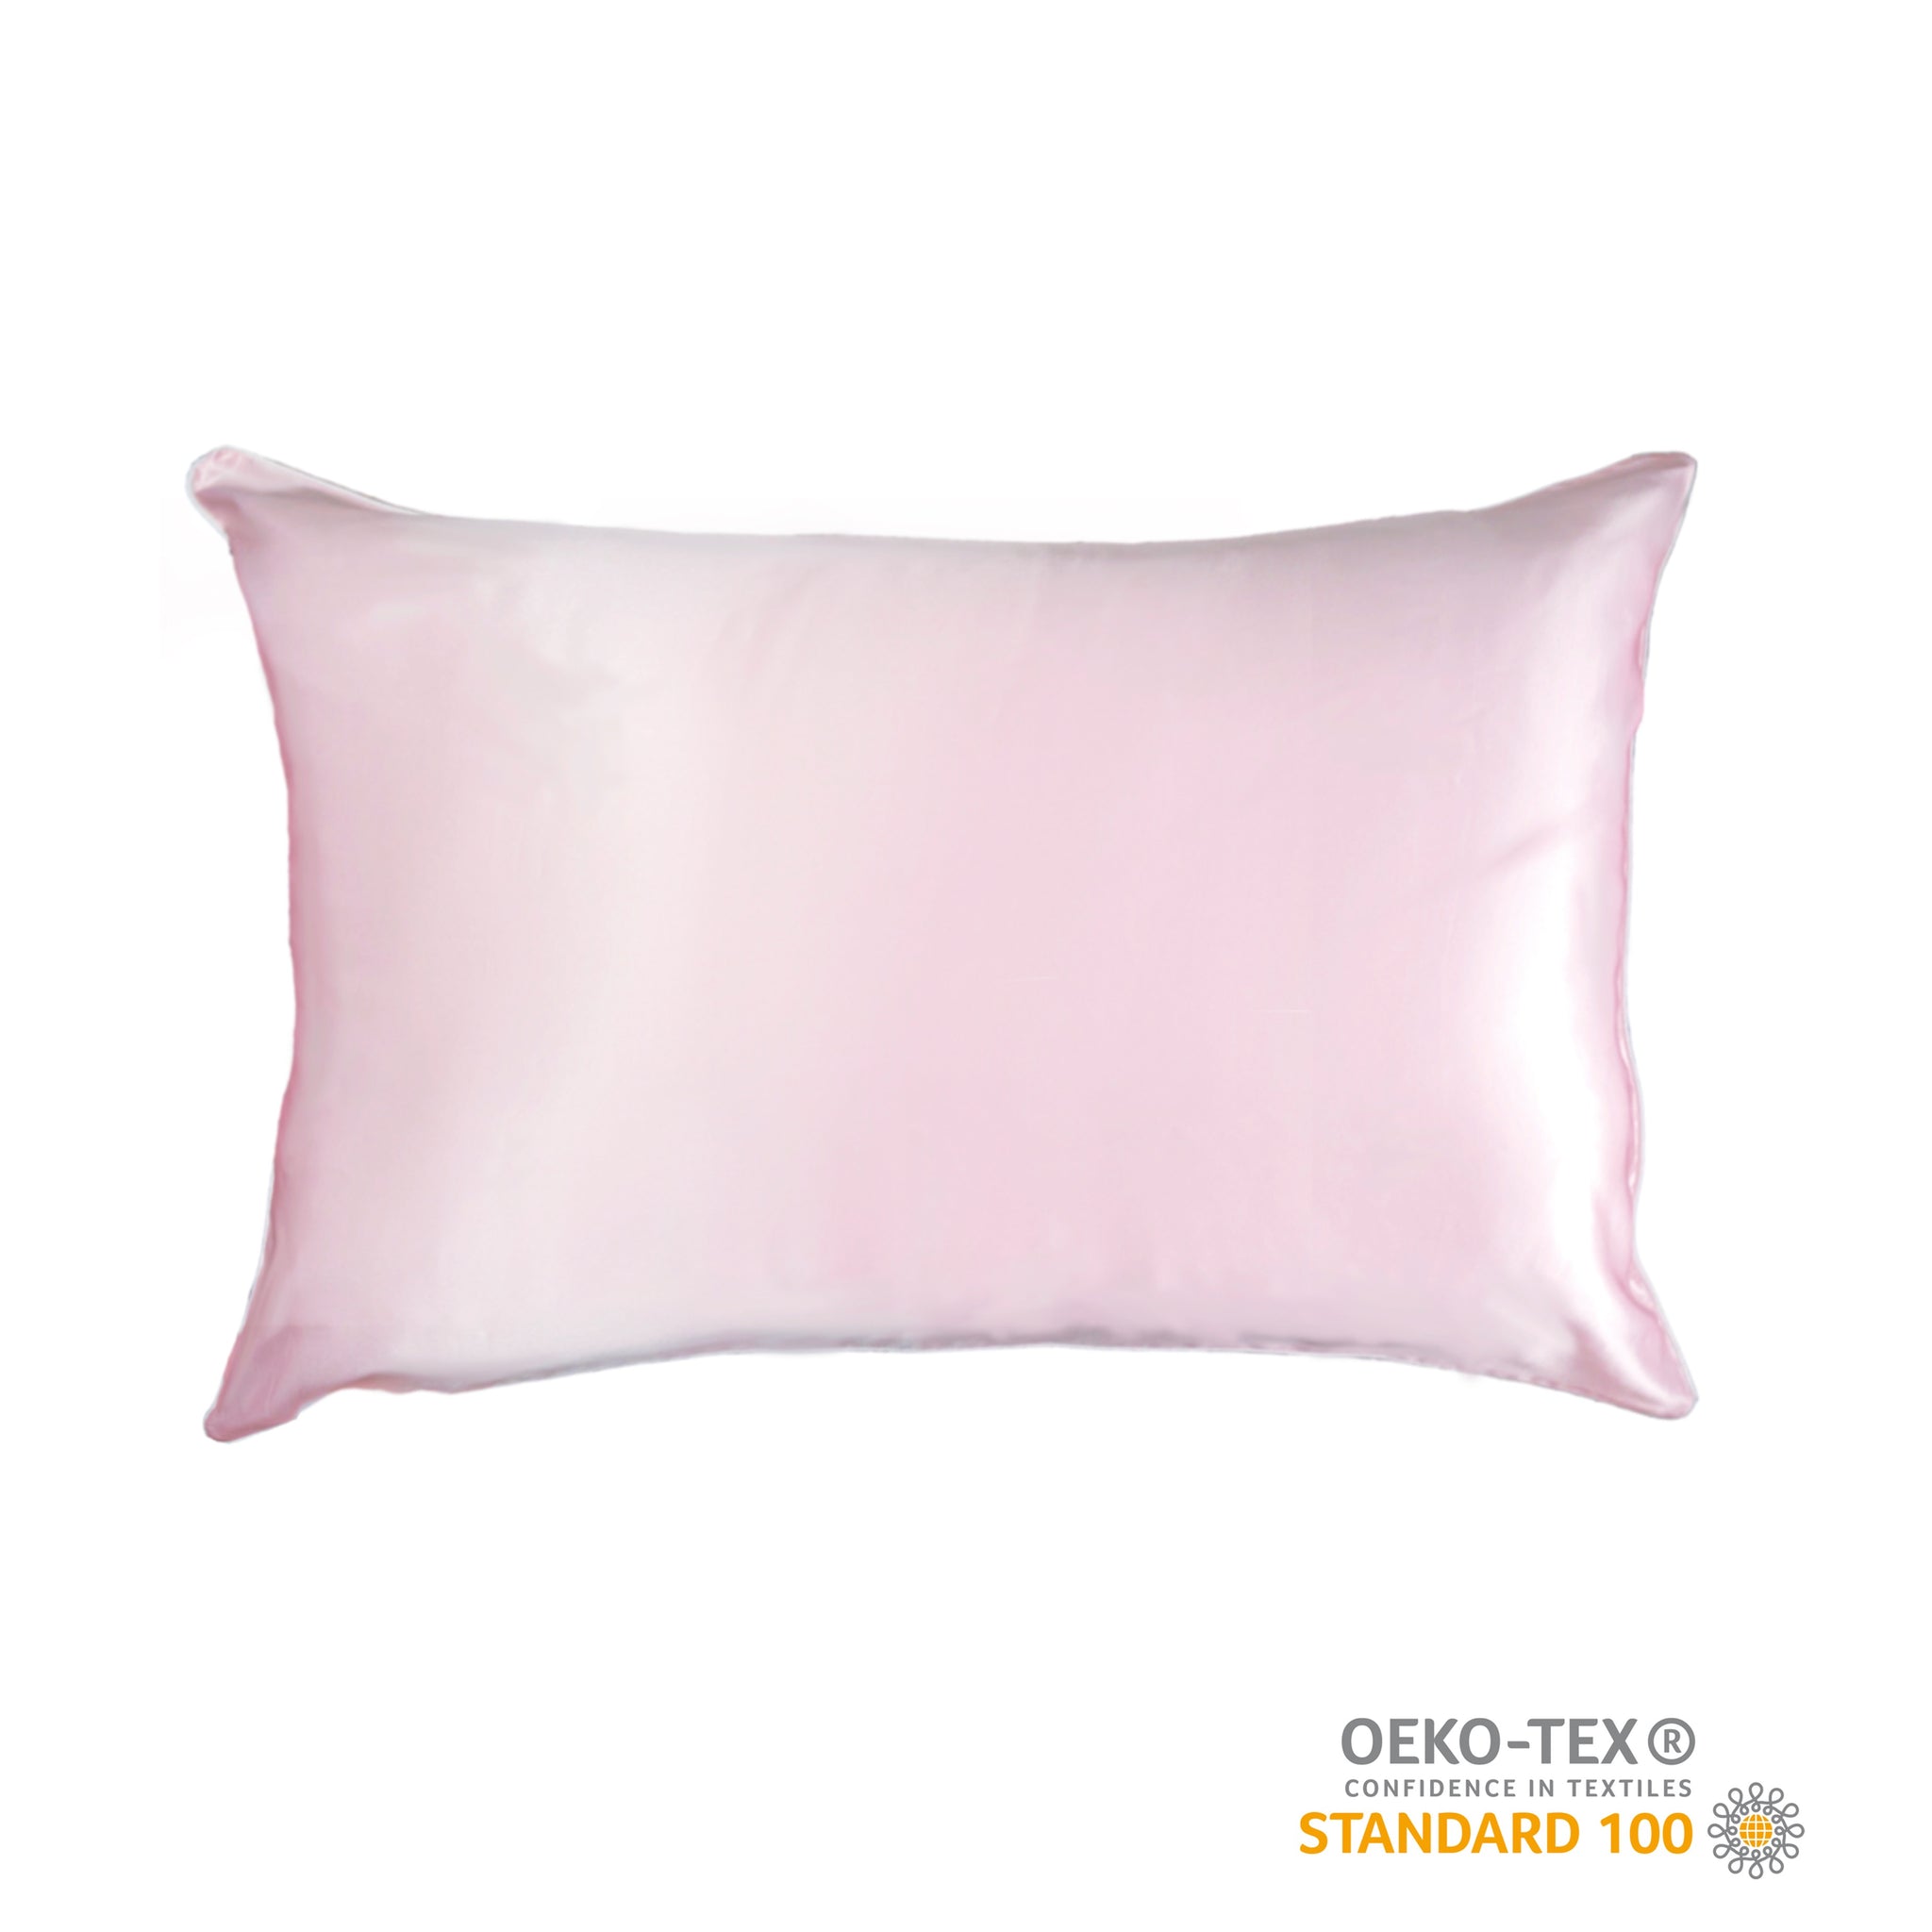 Silk Pillowcase - Pearly Pink